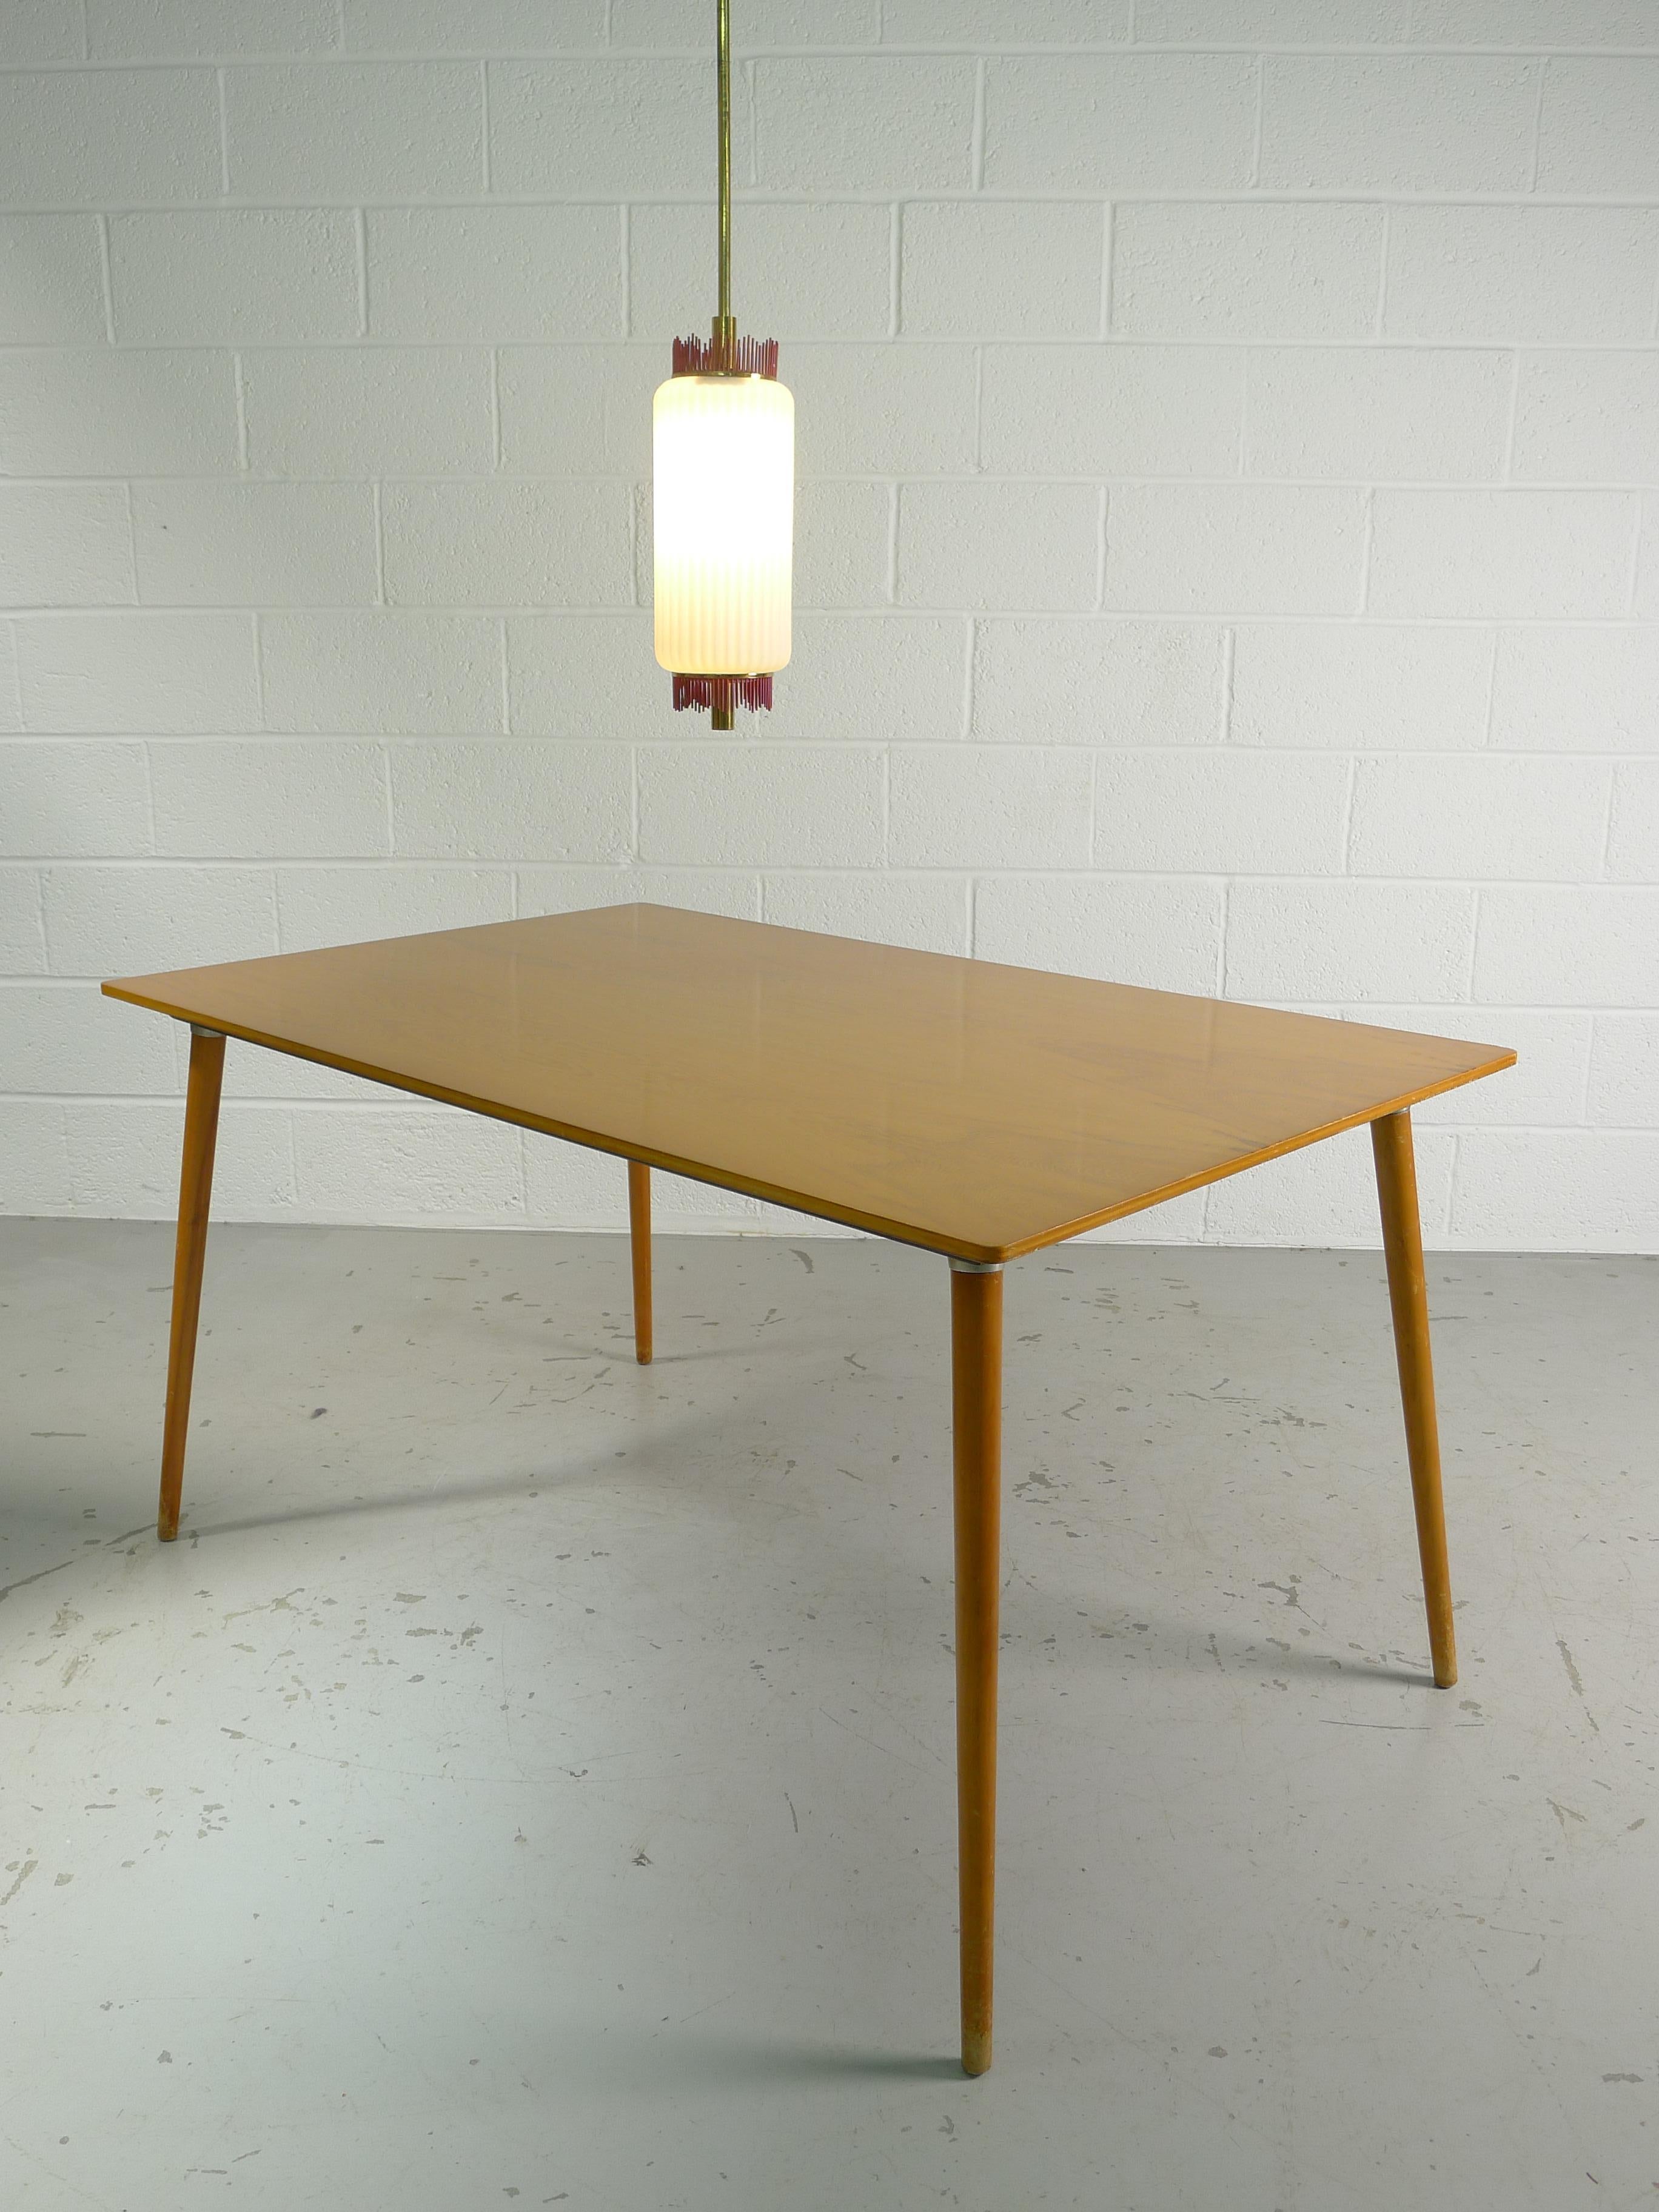 Mid-Century Modern Eames DTW-3 Birch Dining Table, circa 1950, Herman Miller Production